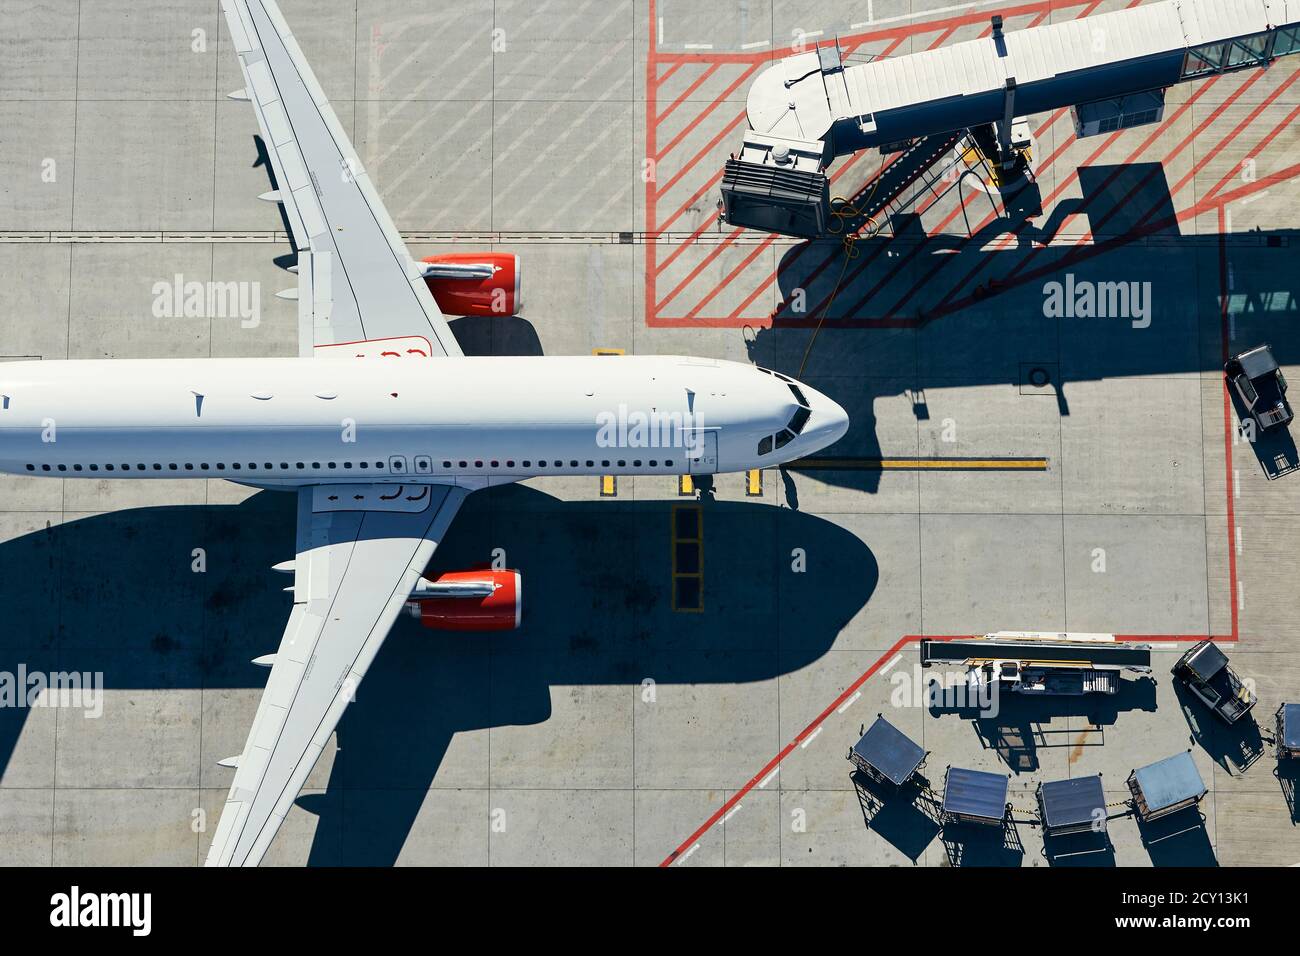 Aerial view of airport. Airplane is taxiing to gate of terminal. Stock Photo